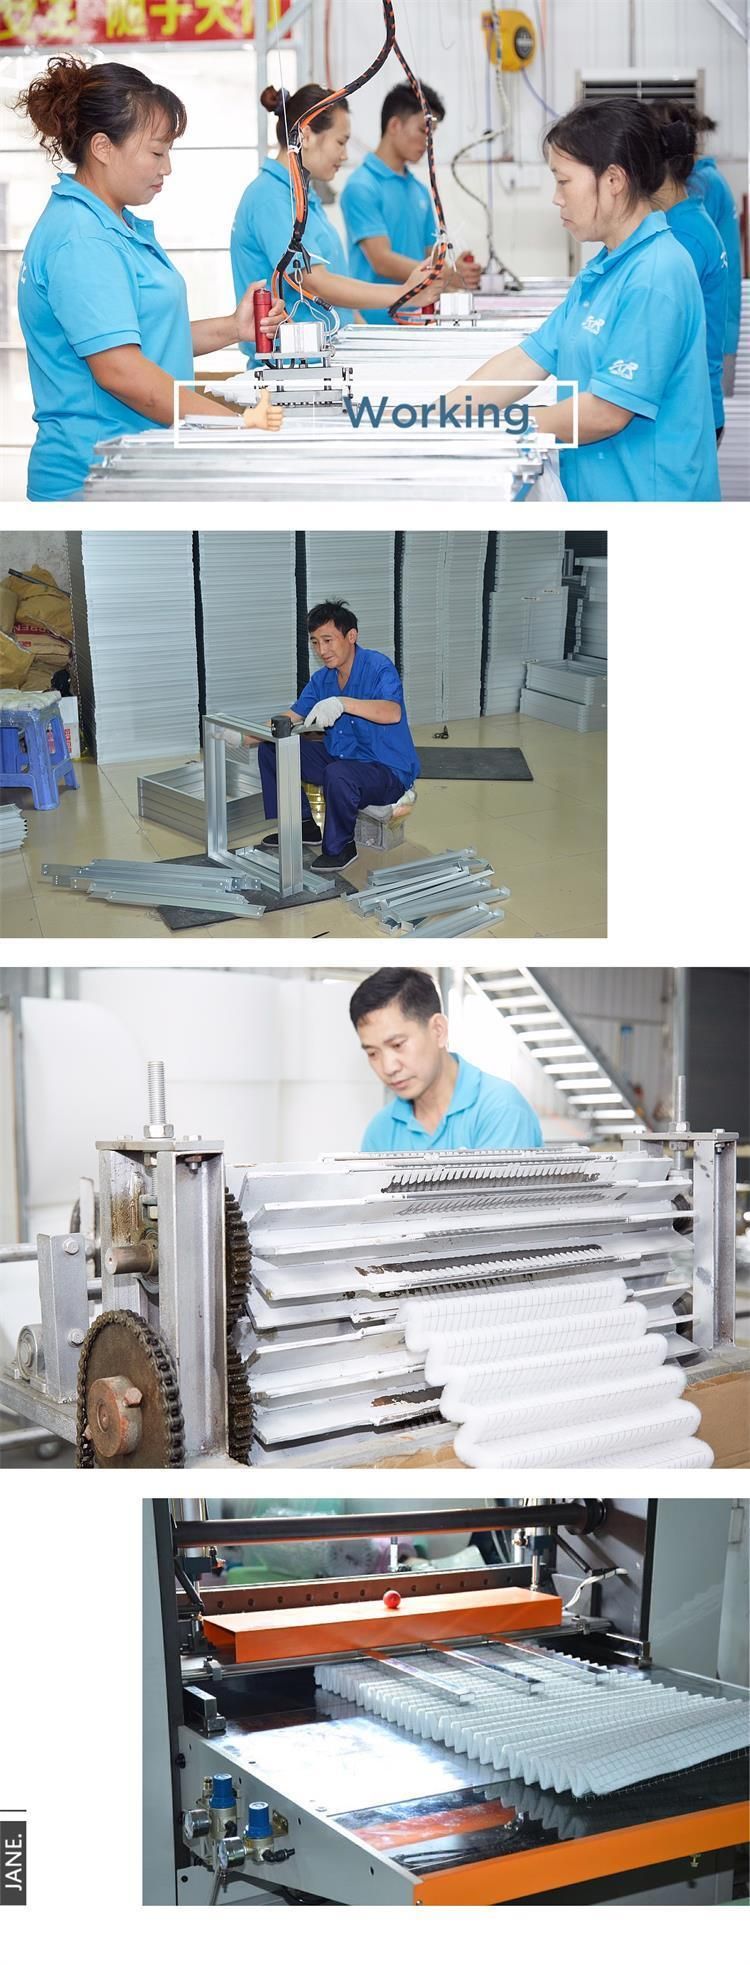 Good Quality Metal Mesh Pre-Filter for Air Circulation System